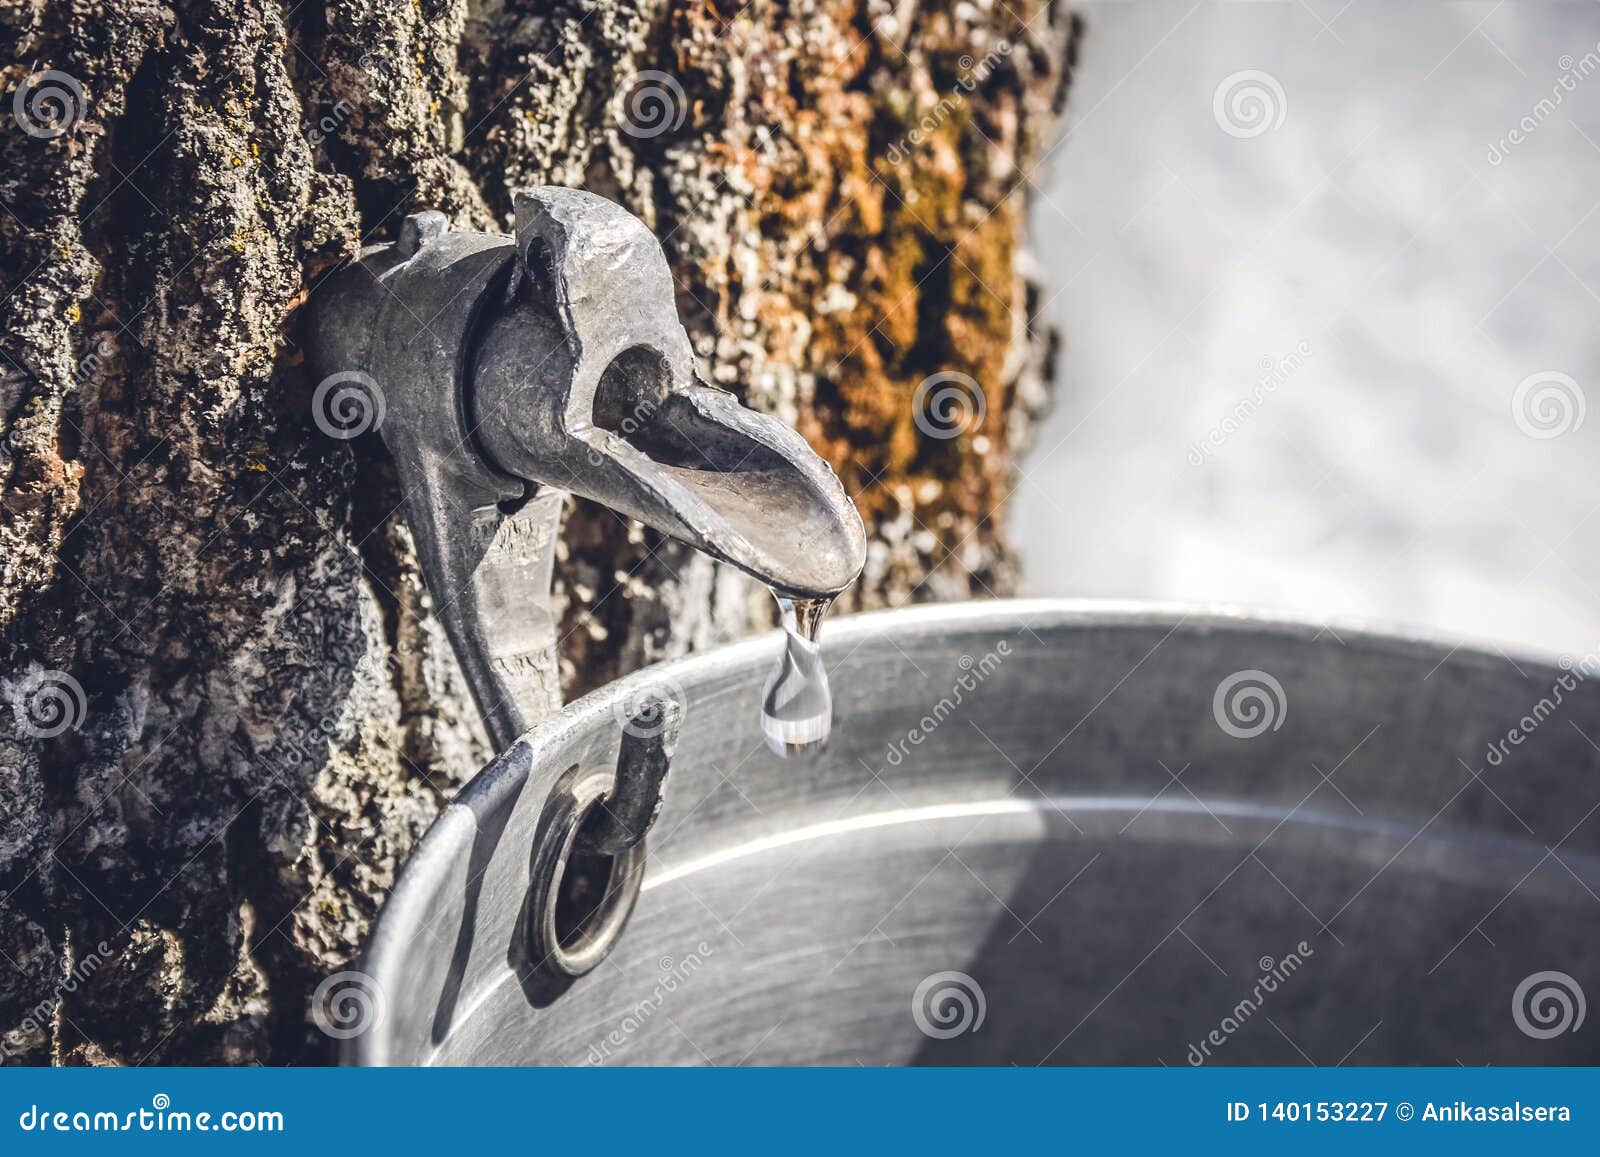 collecting sap from a tree to produce maple syrup